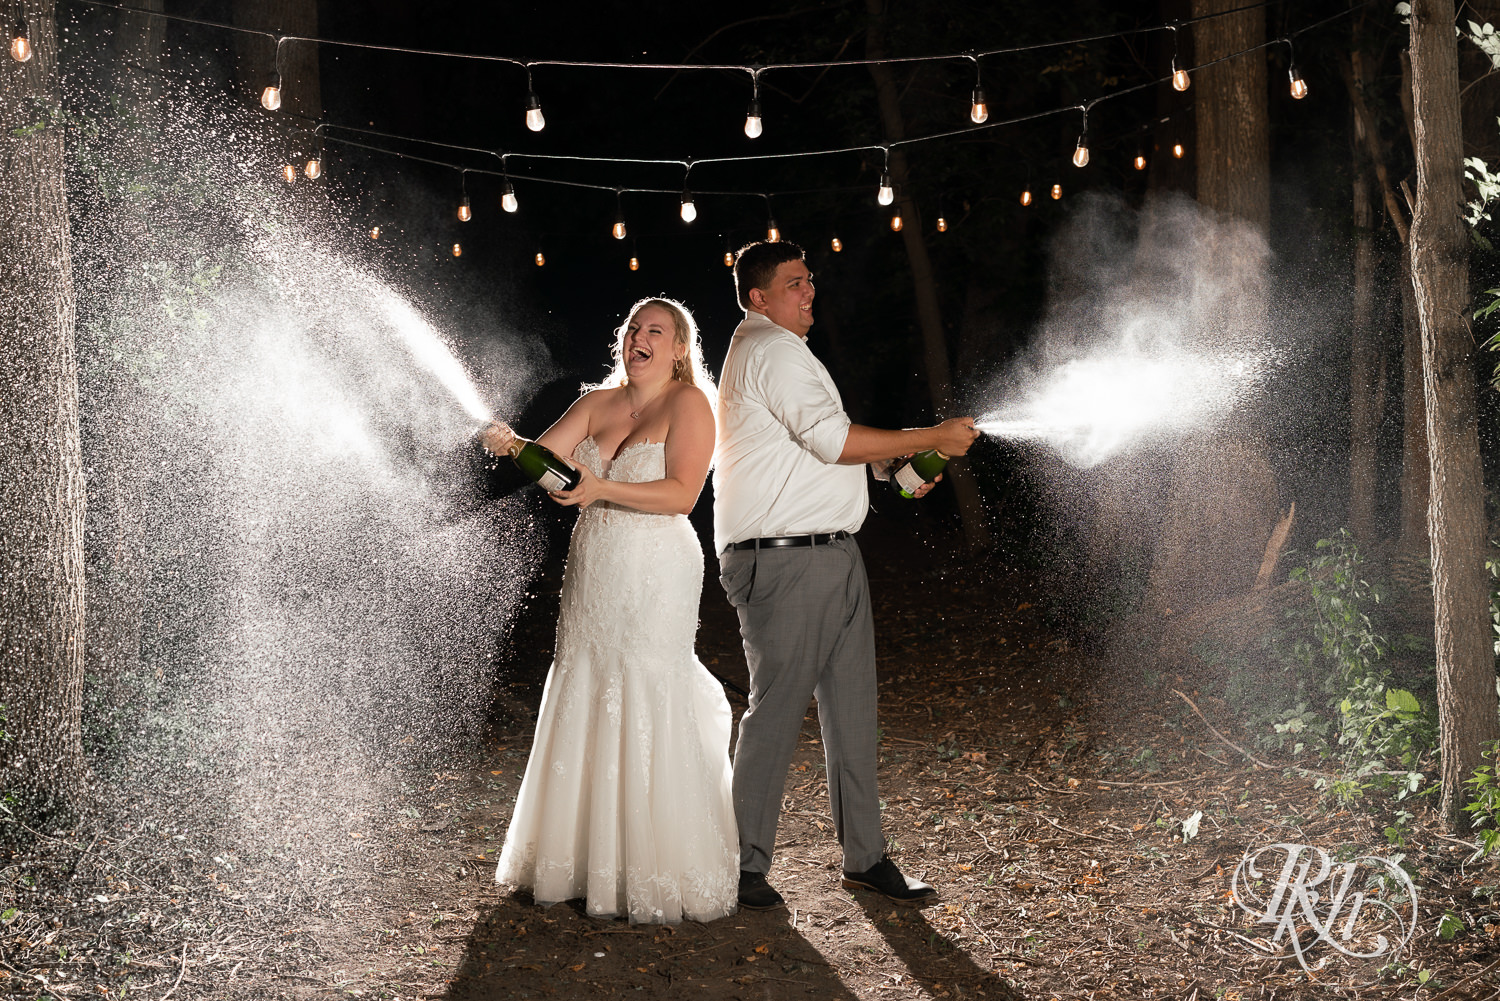 Bride and groom spray champagne while laughing under string lights in the forest.